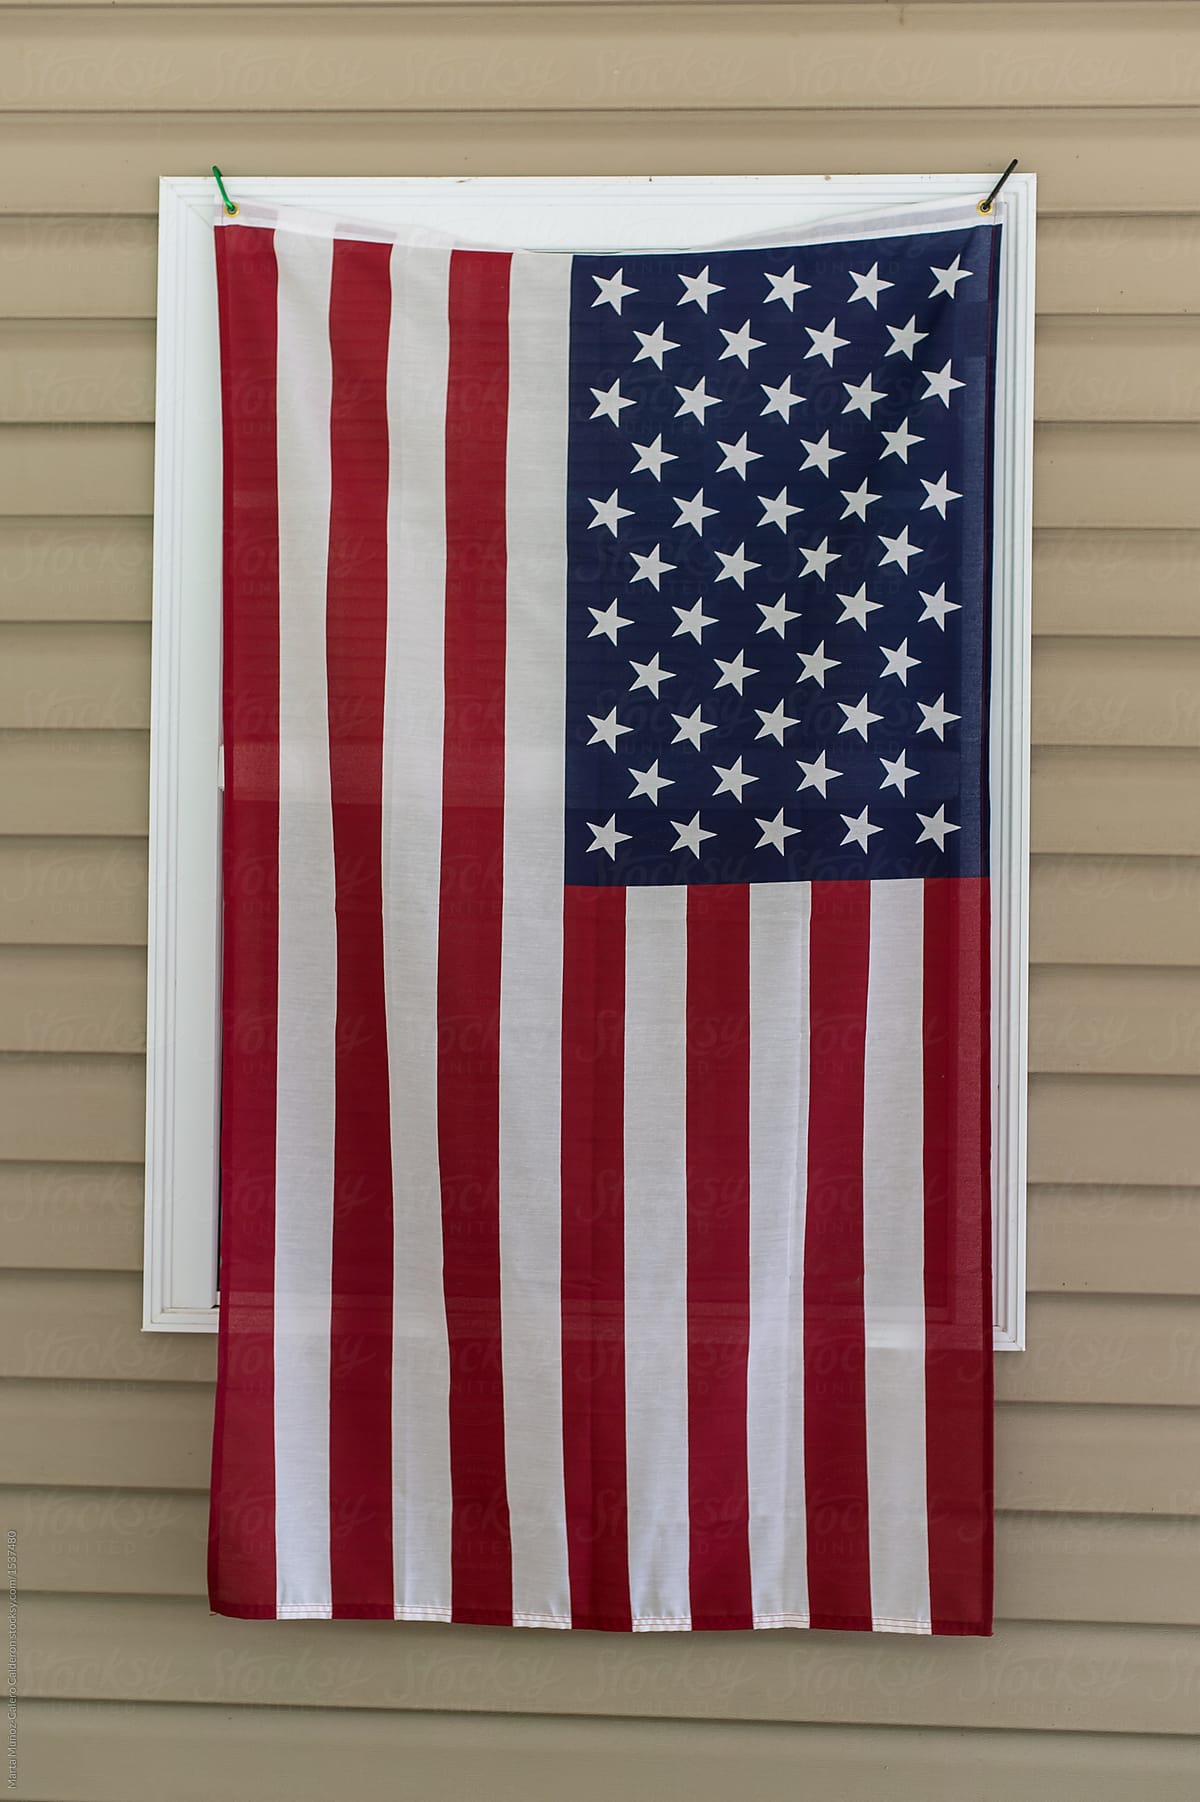 American flag hanging on a window